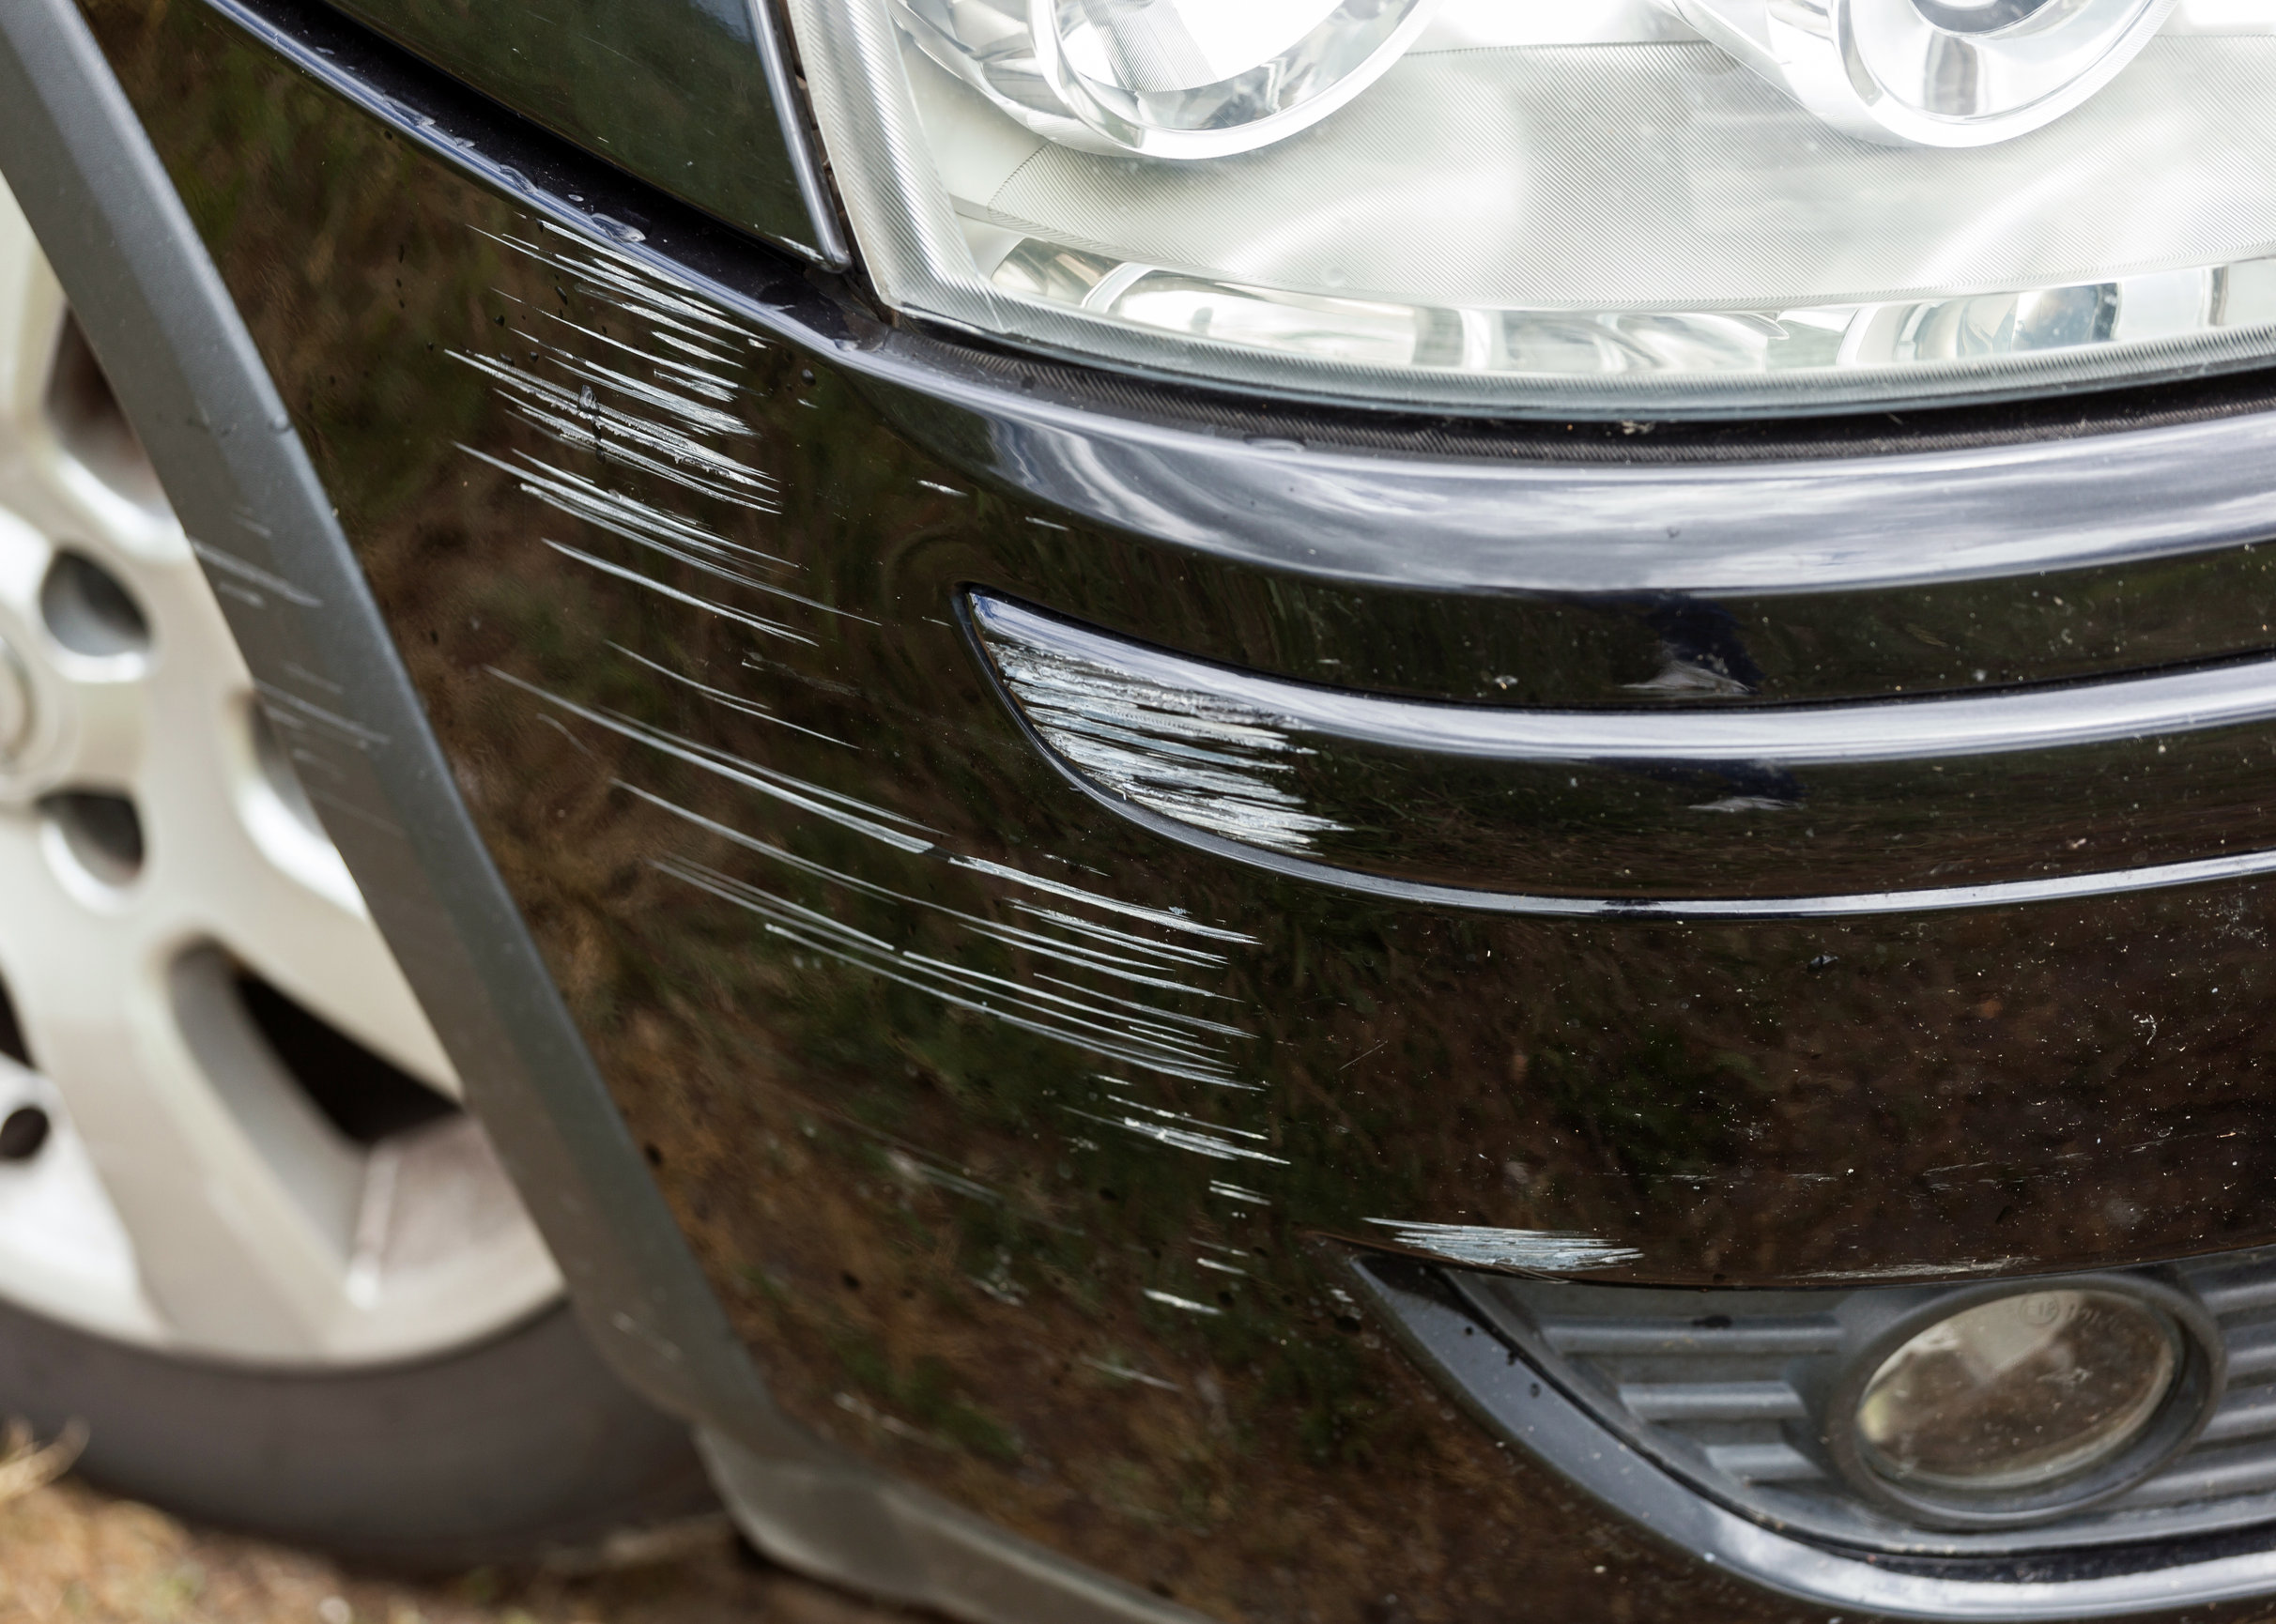 Four Tips for Buffing Out a Car Scratch